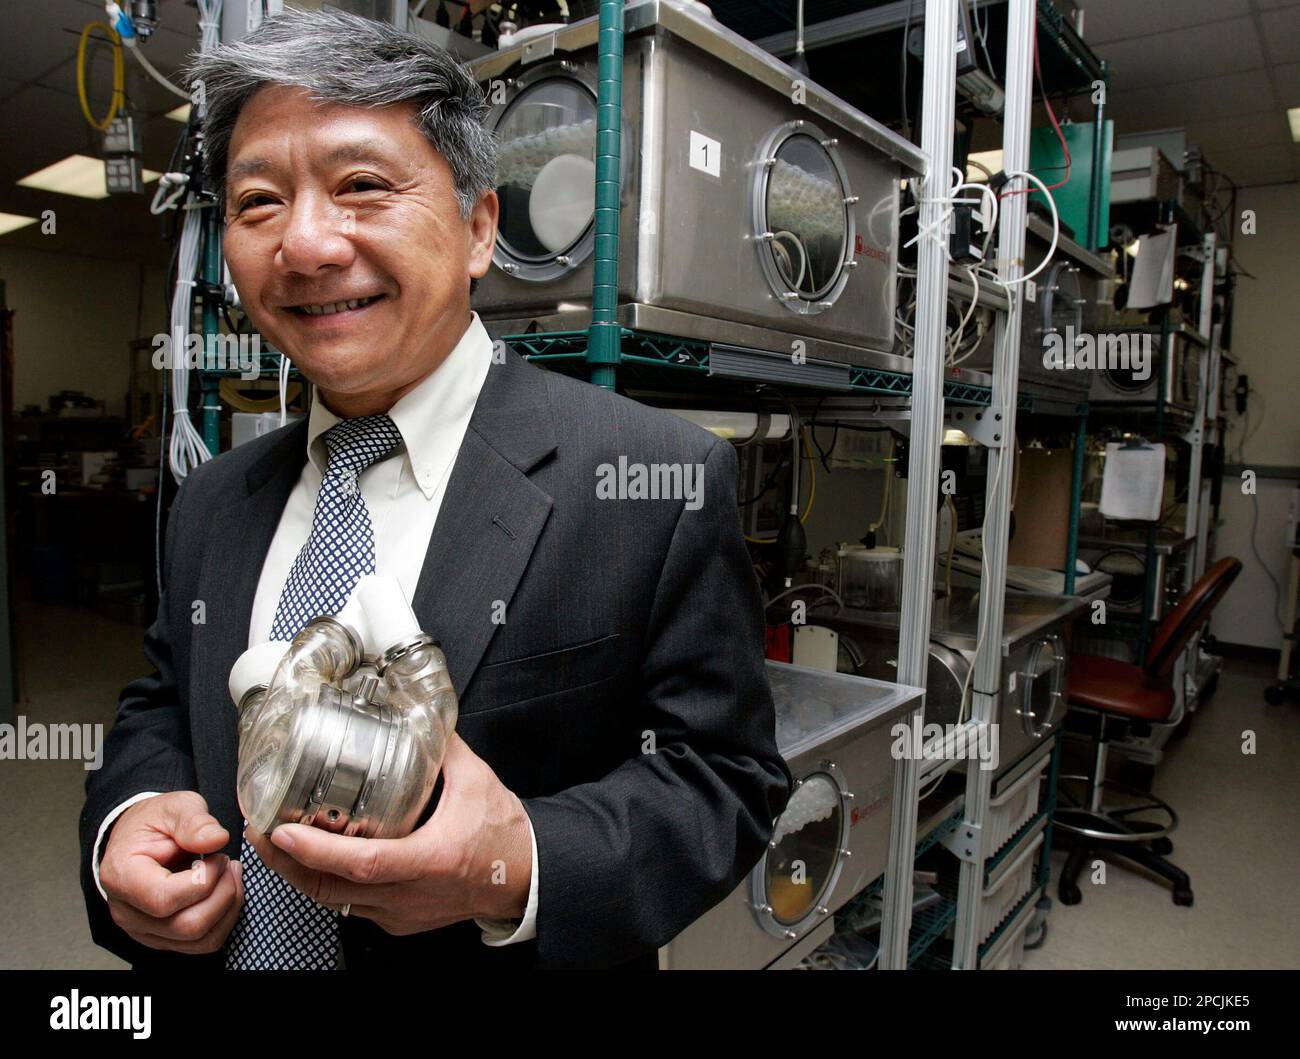 https://c8.alamy.com/comp/2PCJKE5/robert-kung-phd-chief-scientific-officer-at-abiomed-inc-poses-at-company-headquarters-with-the-abiocor-artificial-heart-wednesday-sept-6-2006-in-danvers-mass-the-food-and-drug-administration-granted-abiomed-inc-a-humanitarian-exemption-on-tuesday-sept-5-2006-allowing-it-to-sell-the-abiocor-devices-the-hearts-would-be-used-only-in-patients-who-are-close-to-death-and-have-no-other-treatment-options-ap-photoadam-hunger-2PCJKE5.jpg